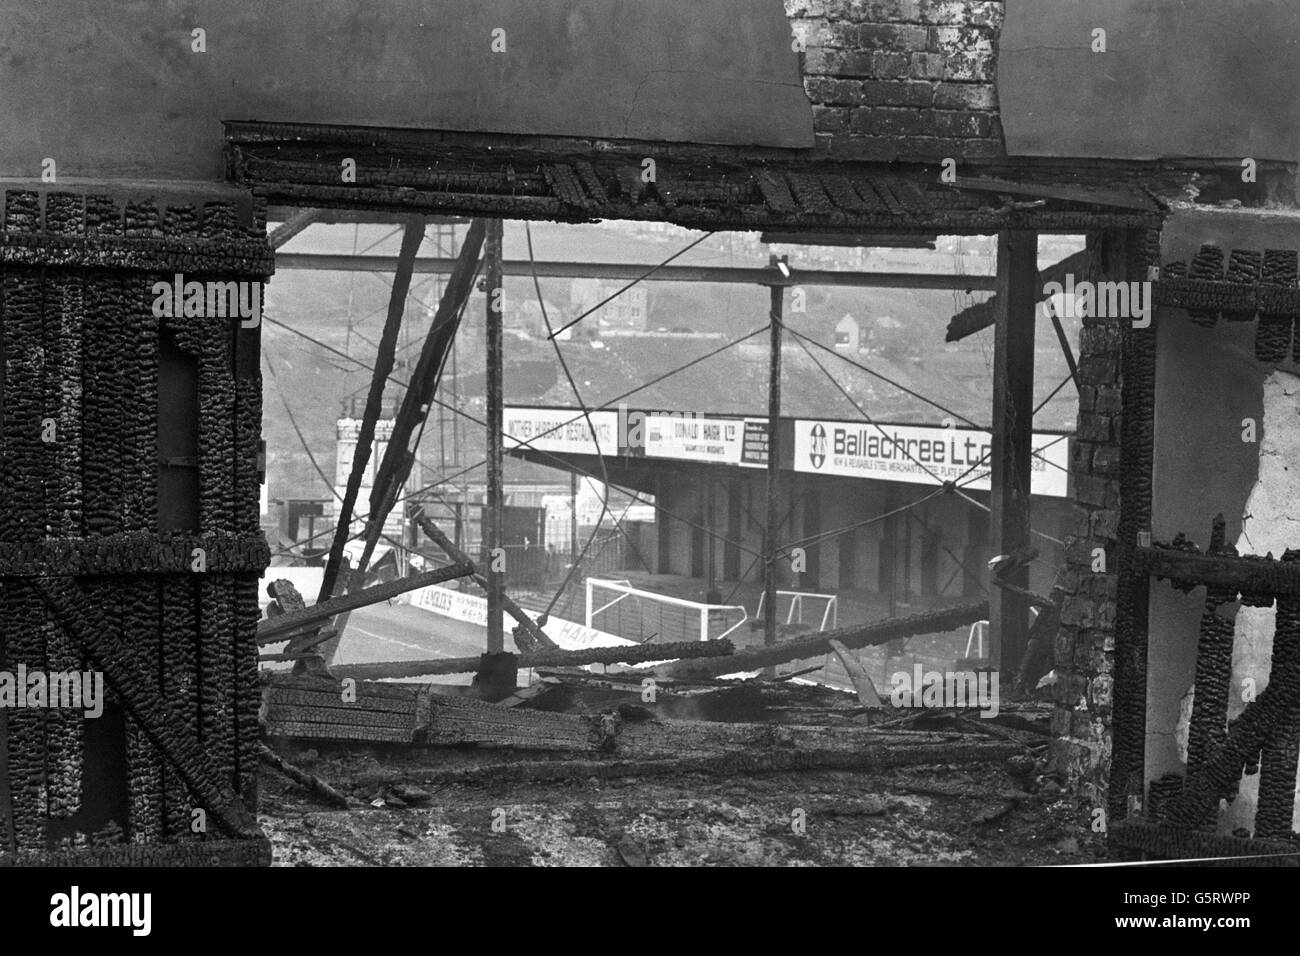 Charred exit gates in the main stand at Bradford City's Valley Parade stadium, where 56 people died and 265 were injured as a fire swept the packed stand just before half-time of the game against Lincoln City. Stock Photo